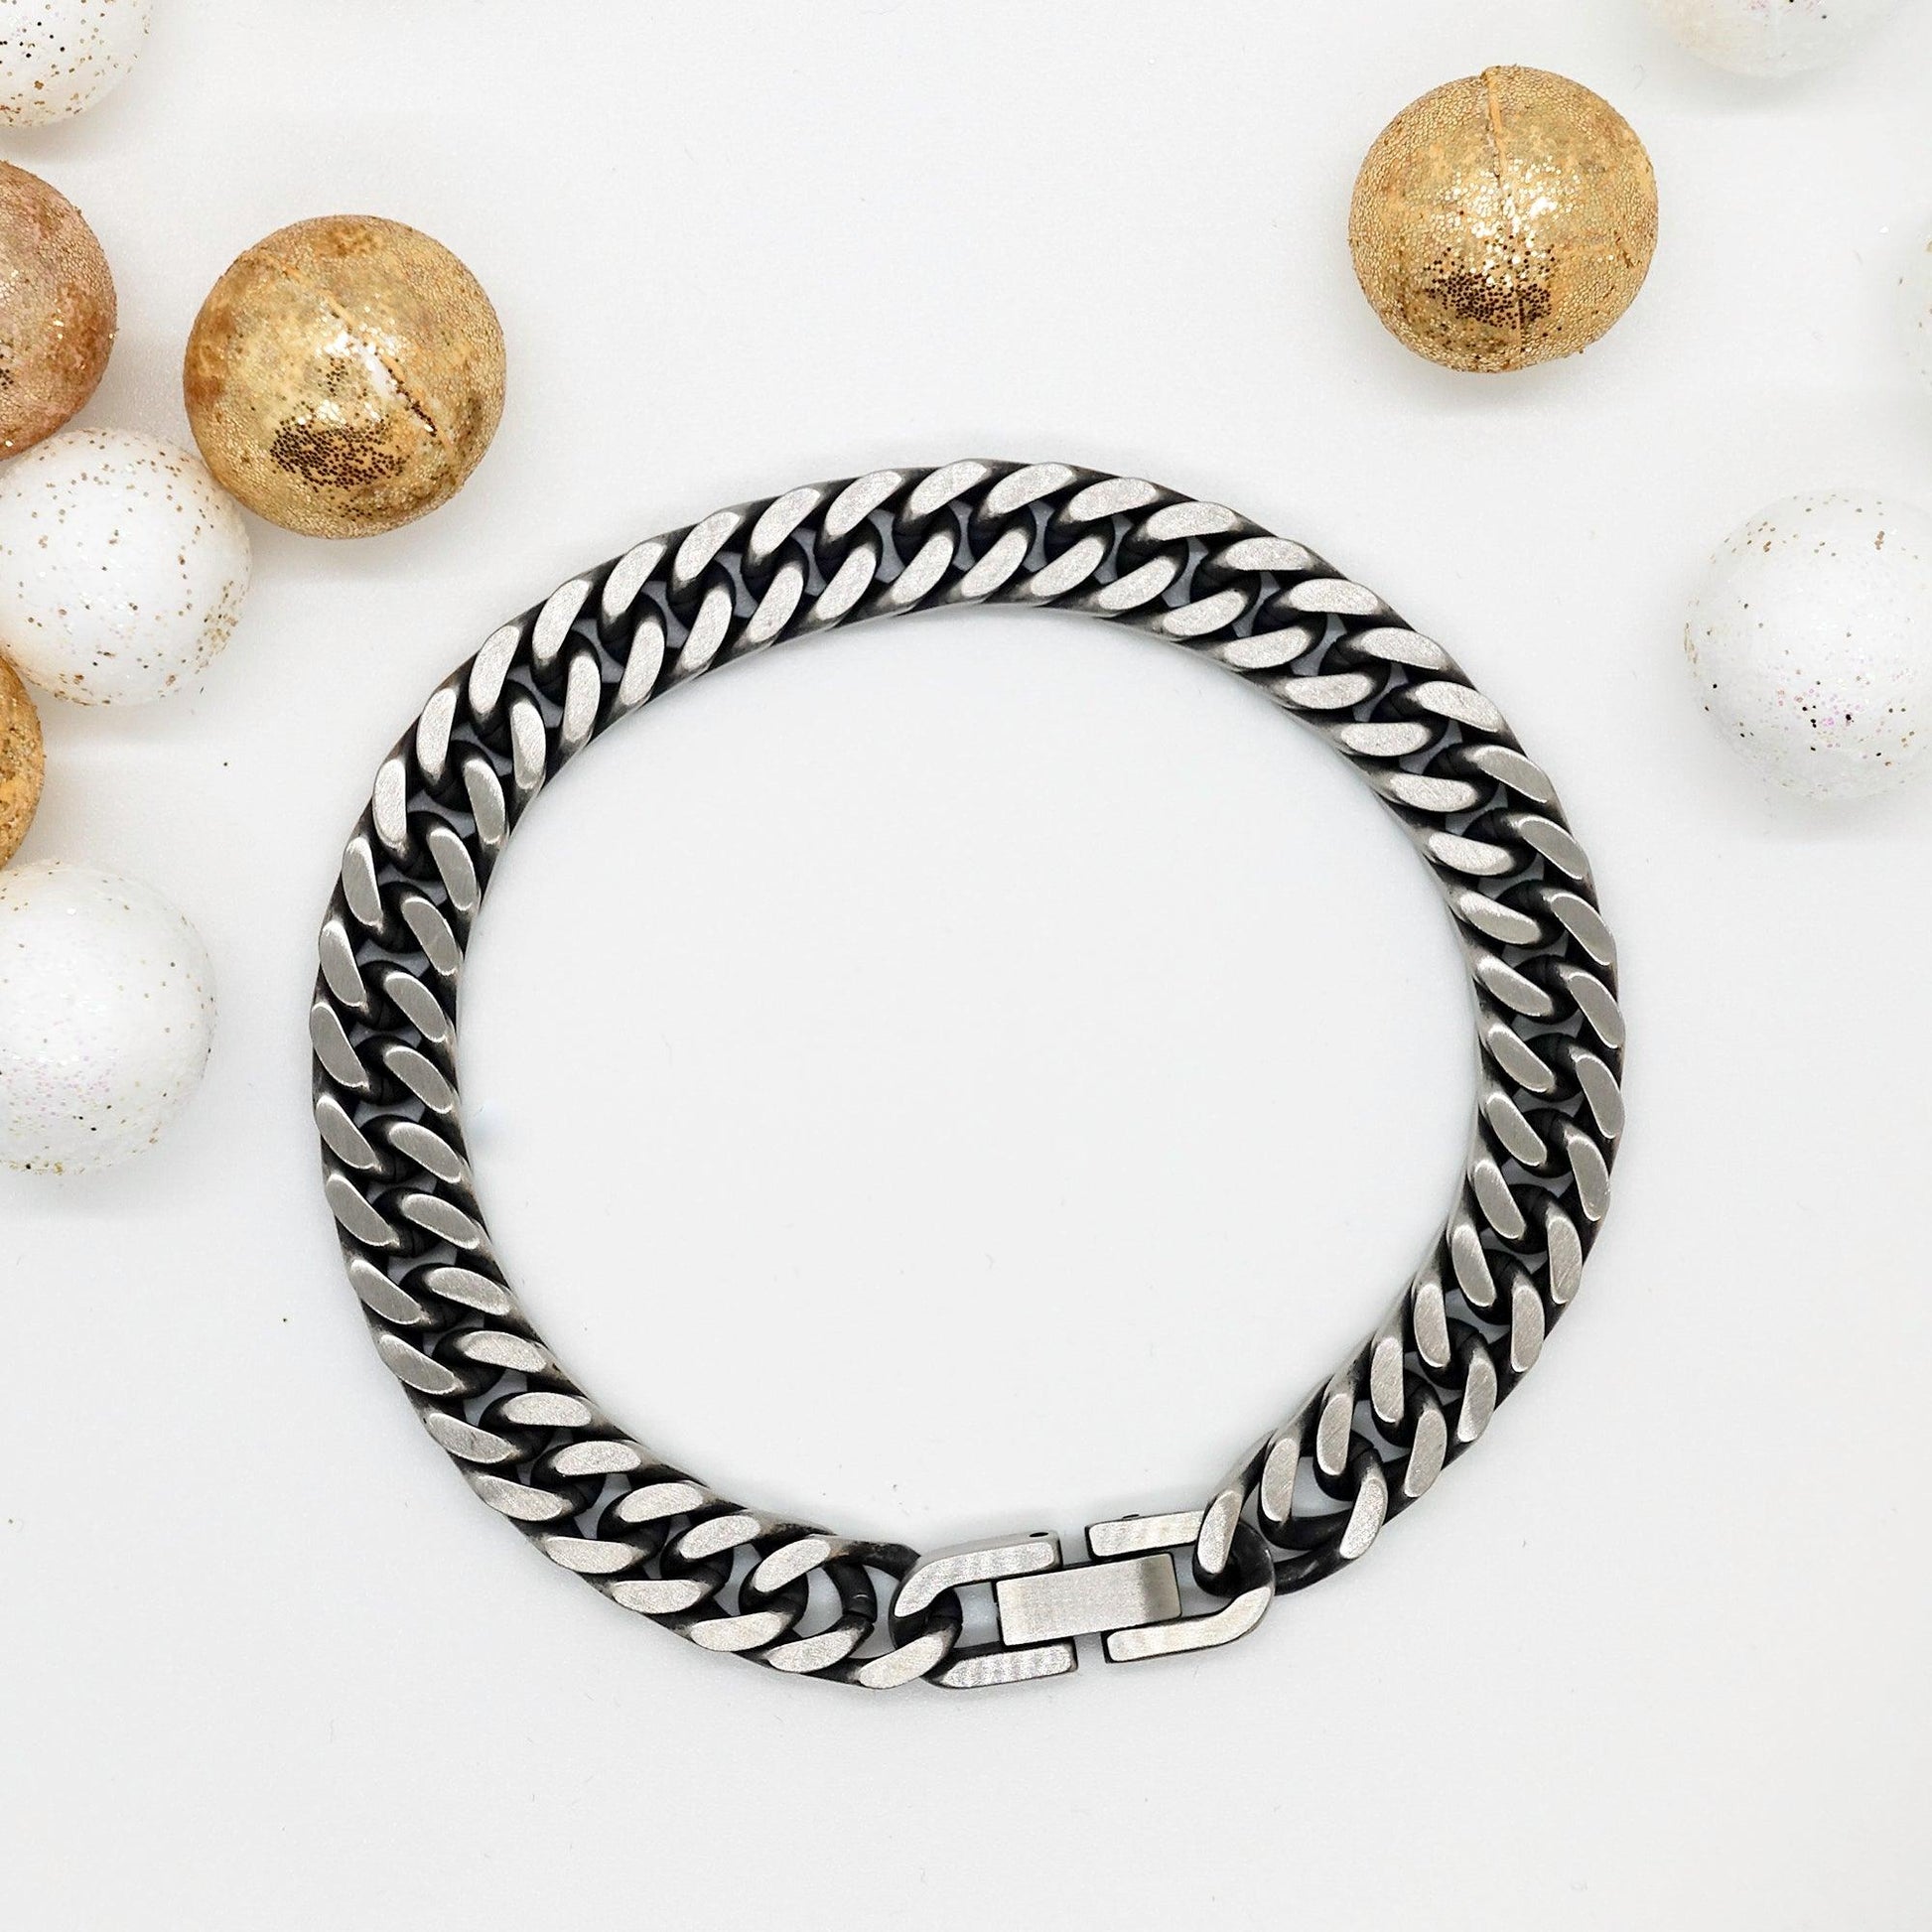 Remarkable Advisor Gifts, Your dedication and hard work, Inspirational Birthday Christmas Unique Cuban Link Chain Bracelet For Advisor, Coworkers, Men, Women, Friends - Mallard Moon Gift Shop